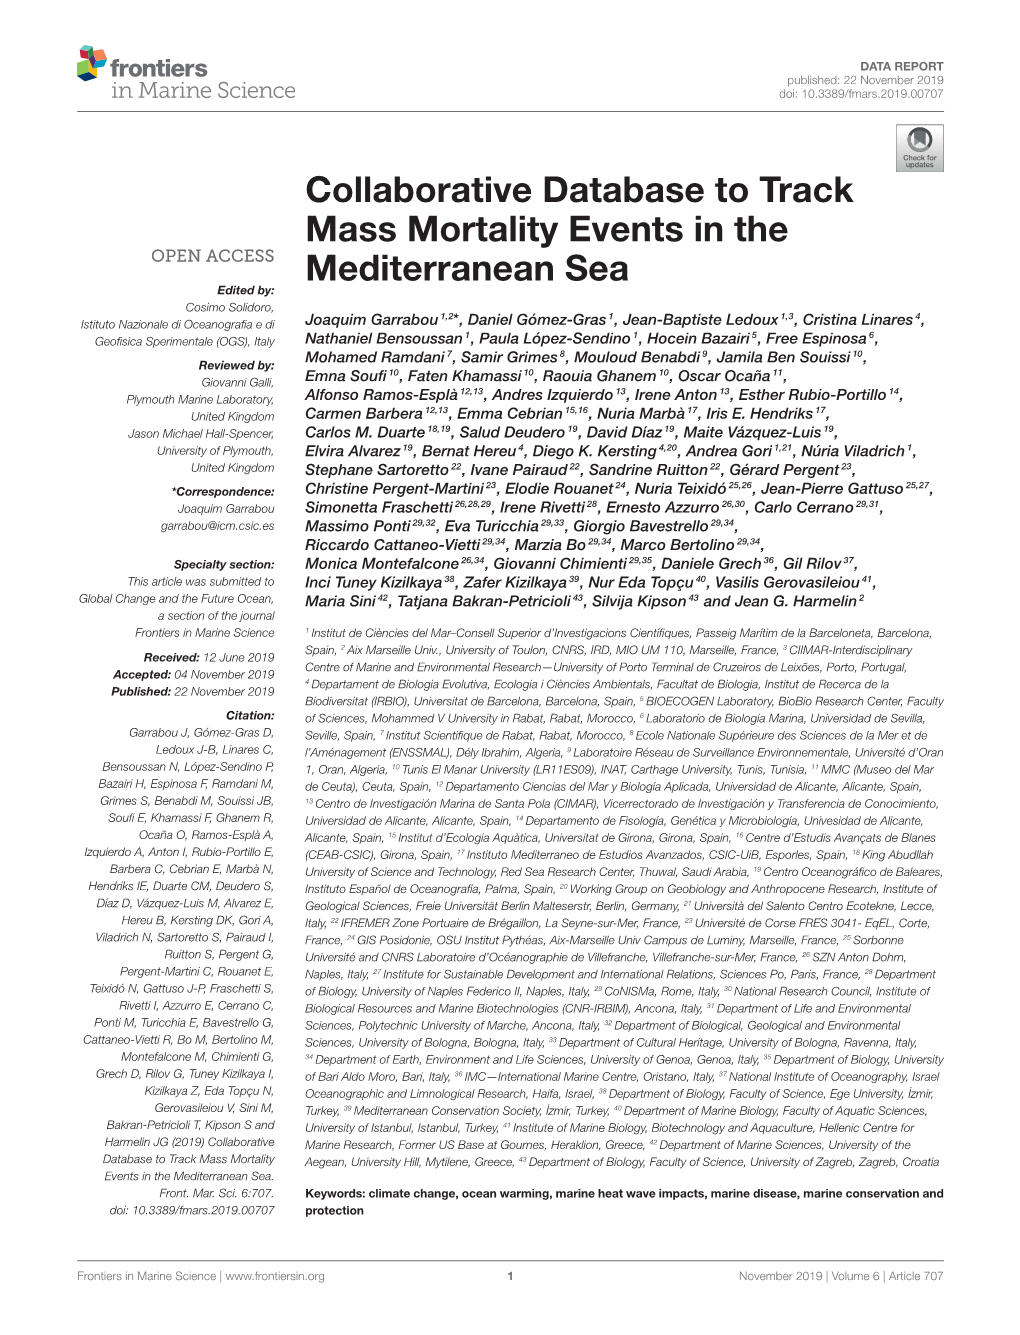 Collaborative Database to Track Mass Mortality Events in The